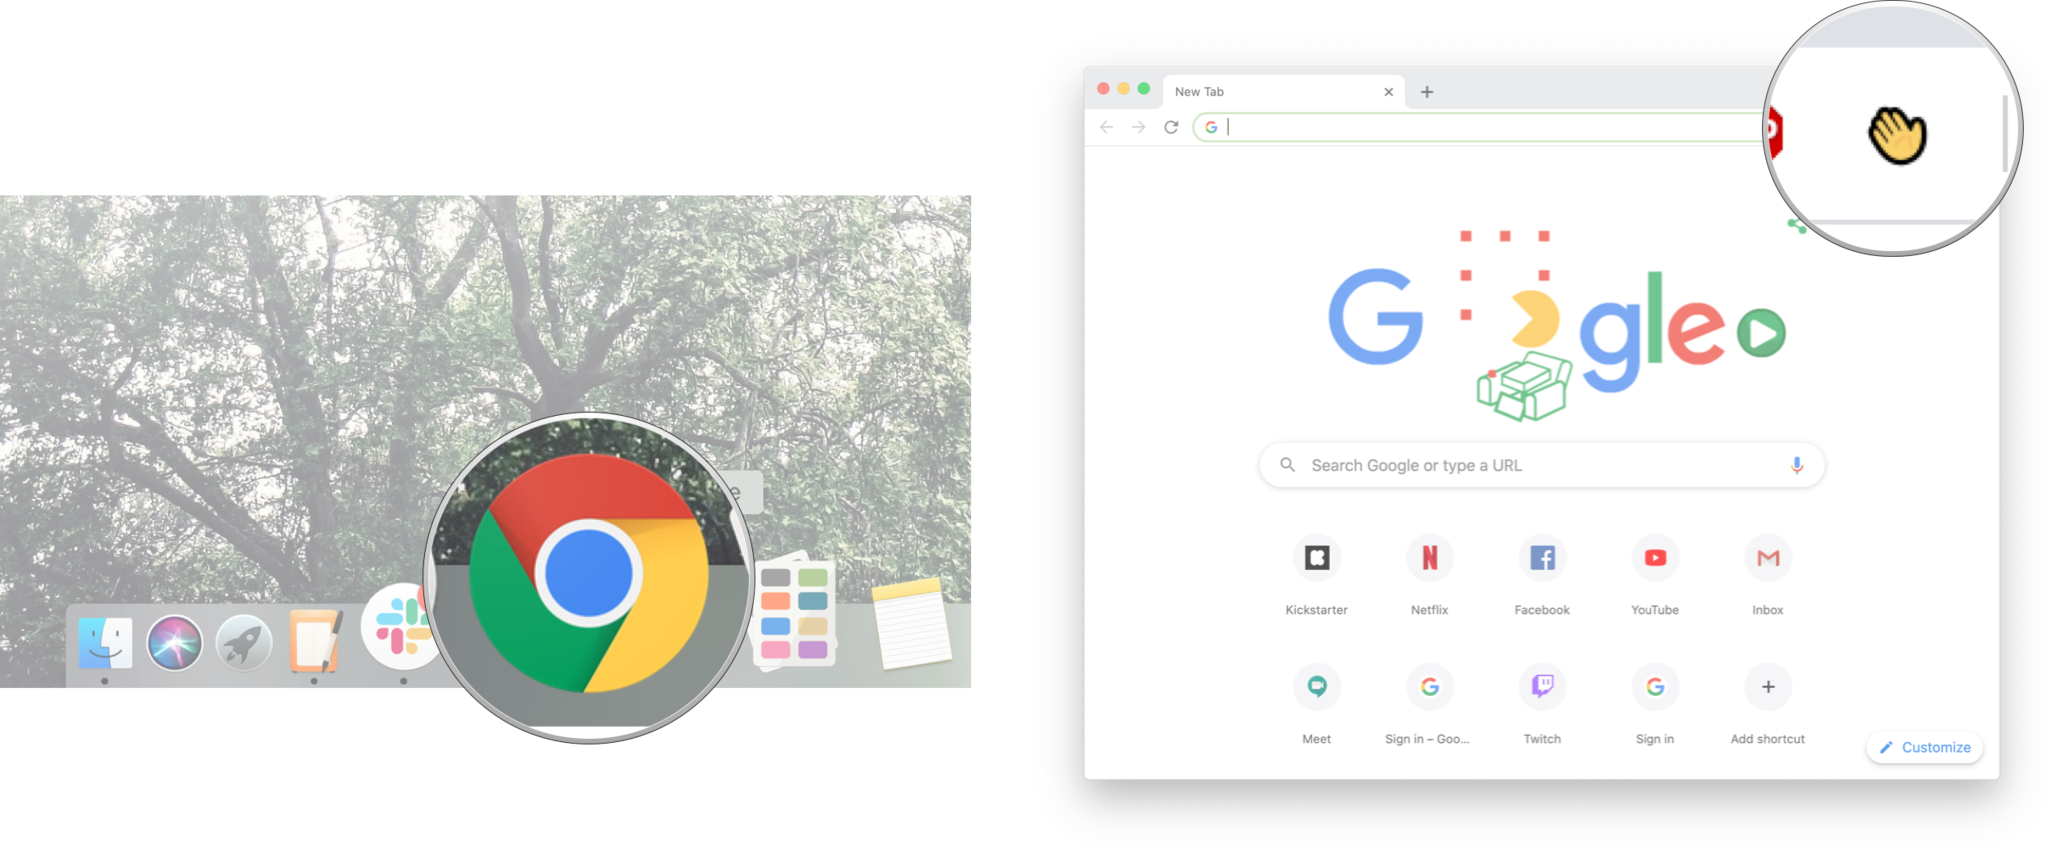 How To Use Houseparty On Chrome Imore